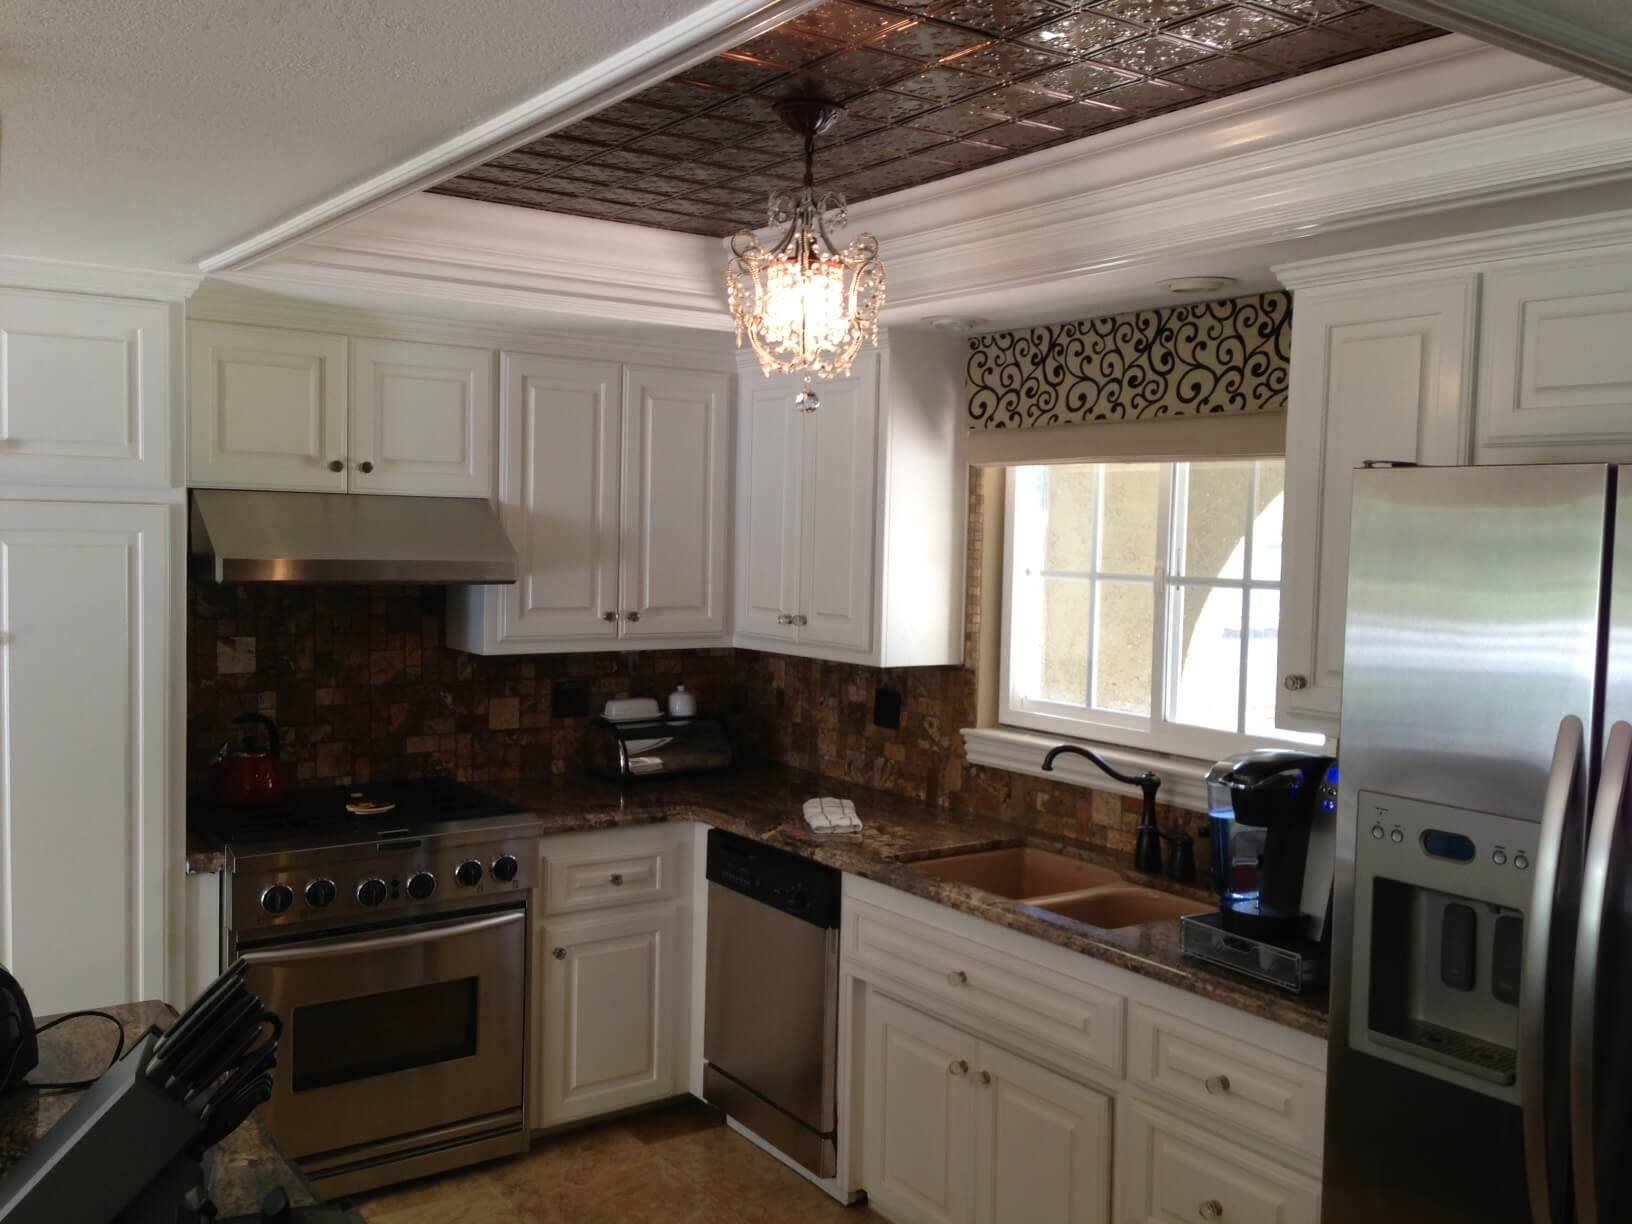 Inexpensive Kitchen Remodel
 Inexpensive Kitchen Remodel for a Fresh Facelift without